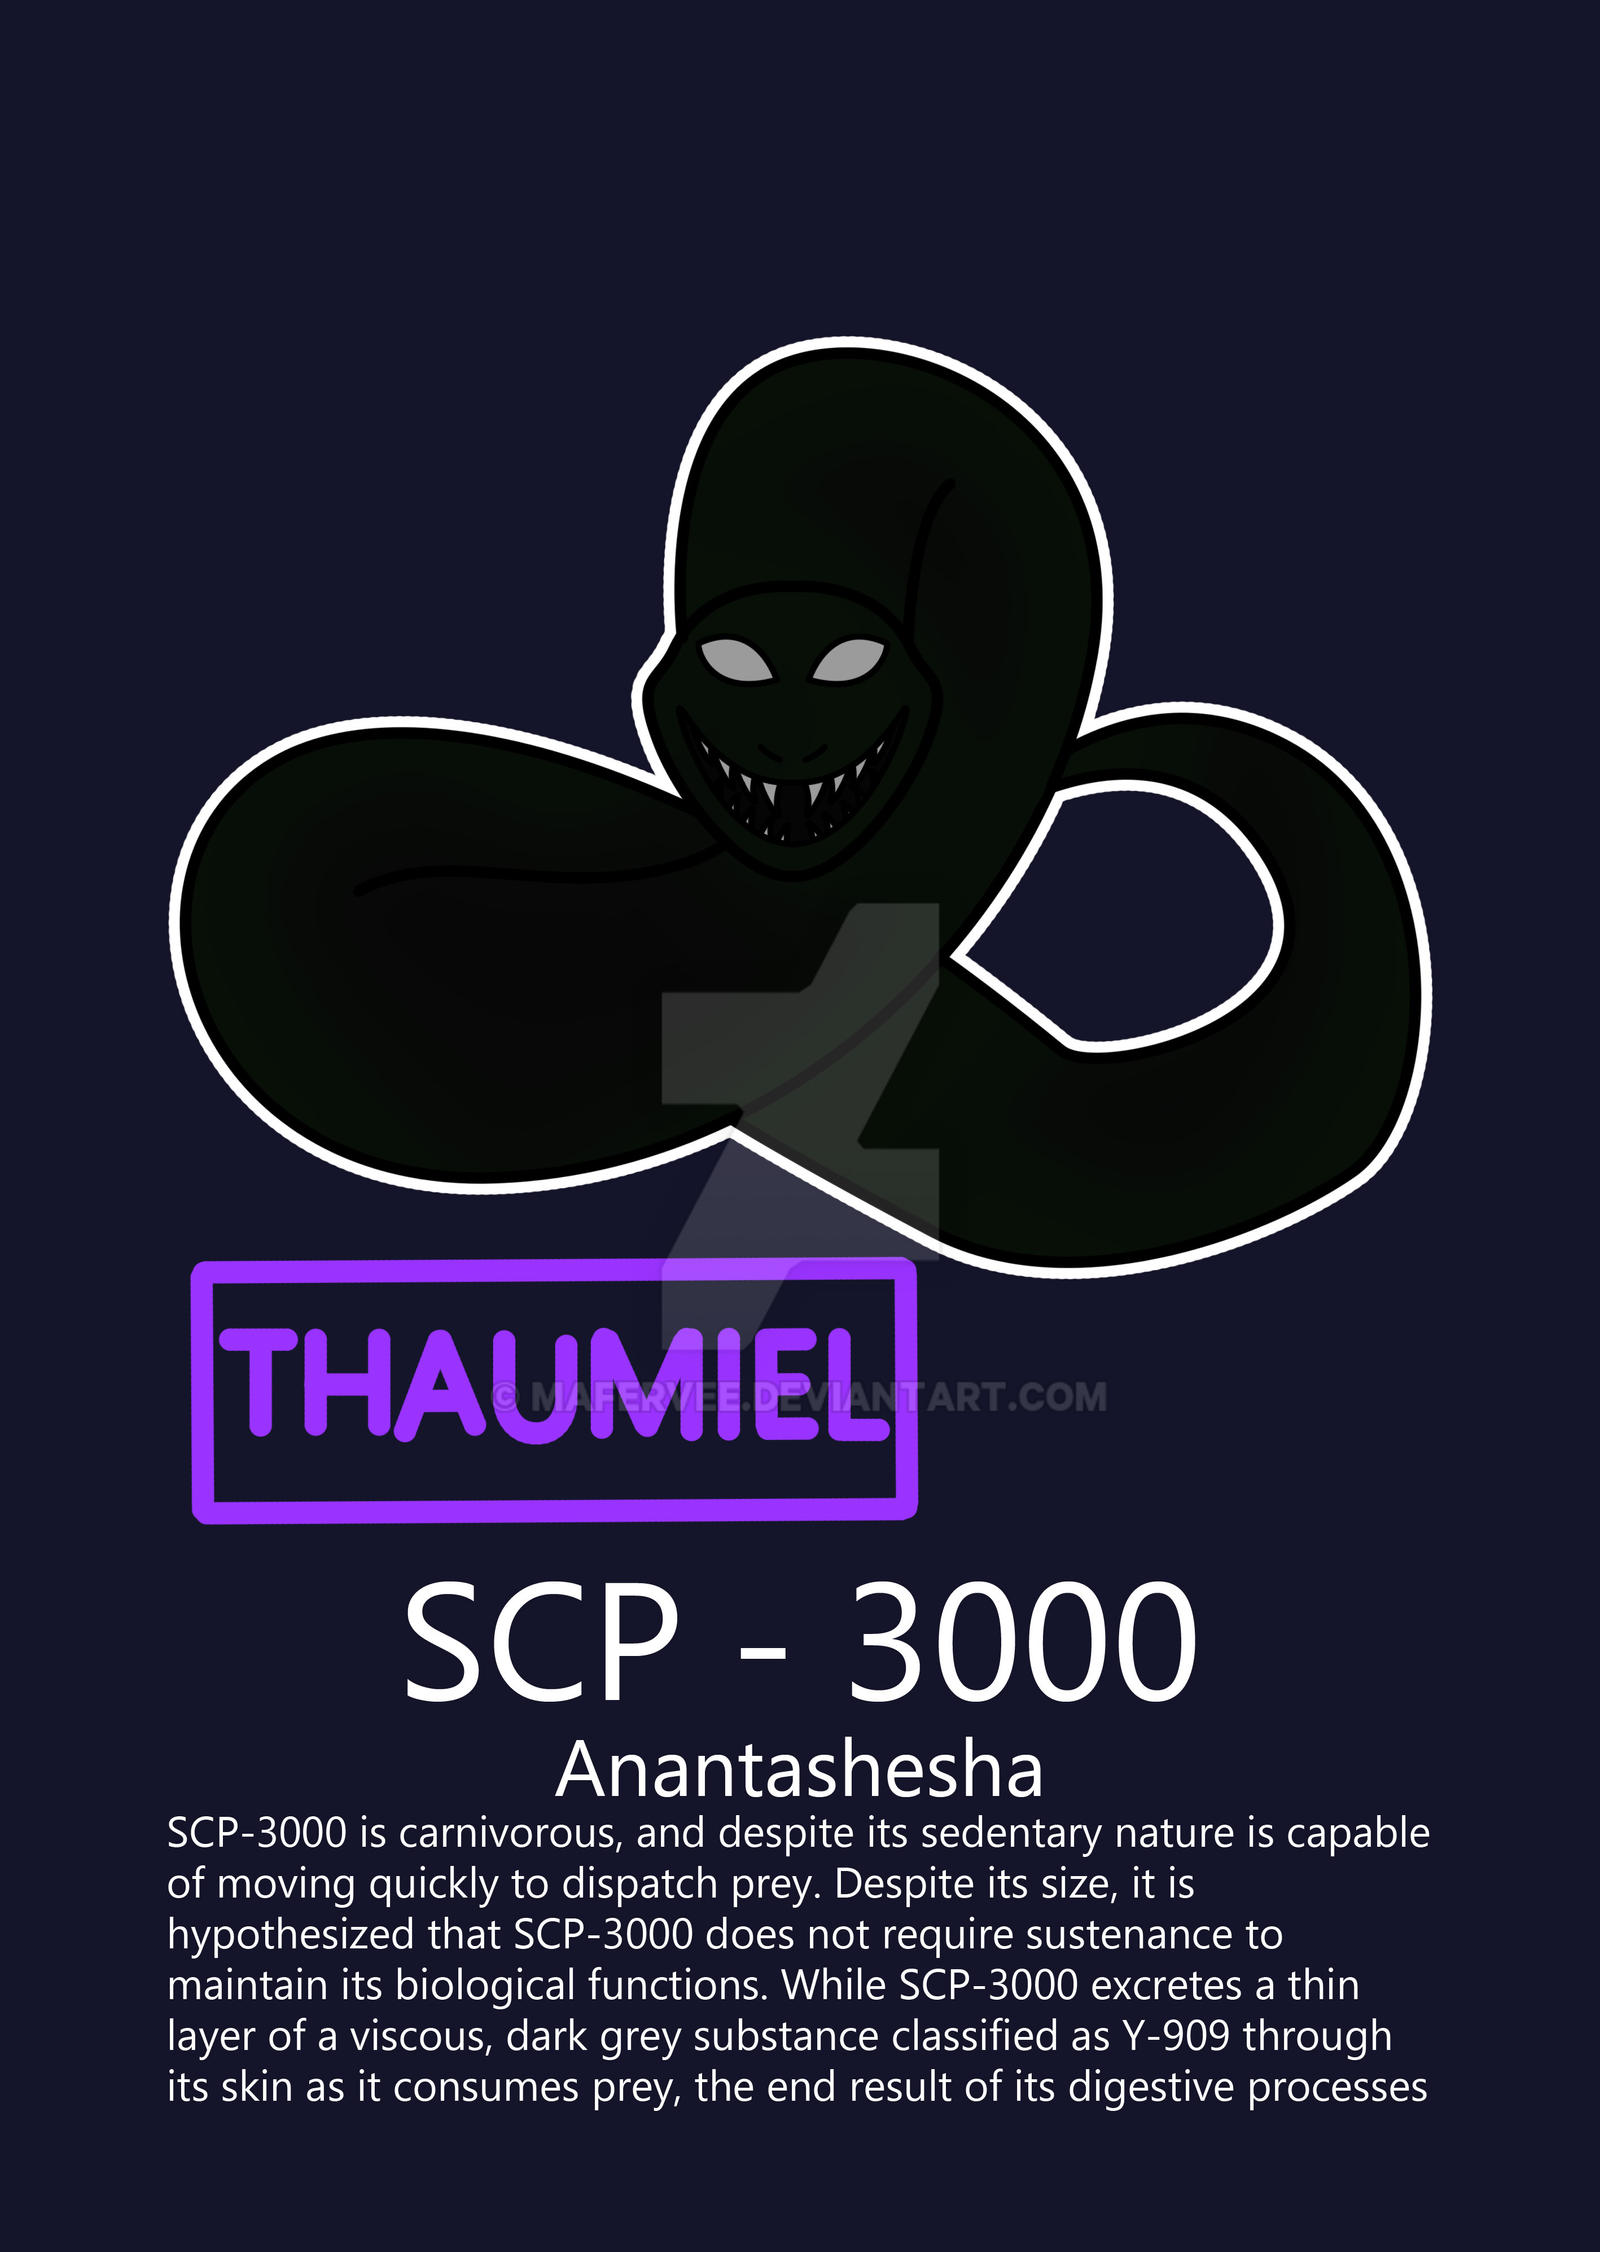 My version of SCP-3000 : r/SCP